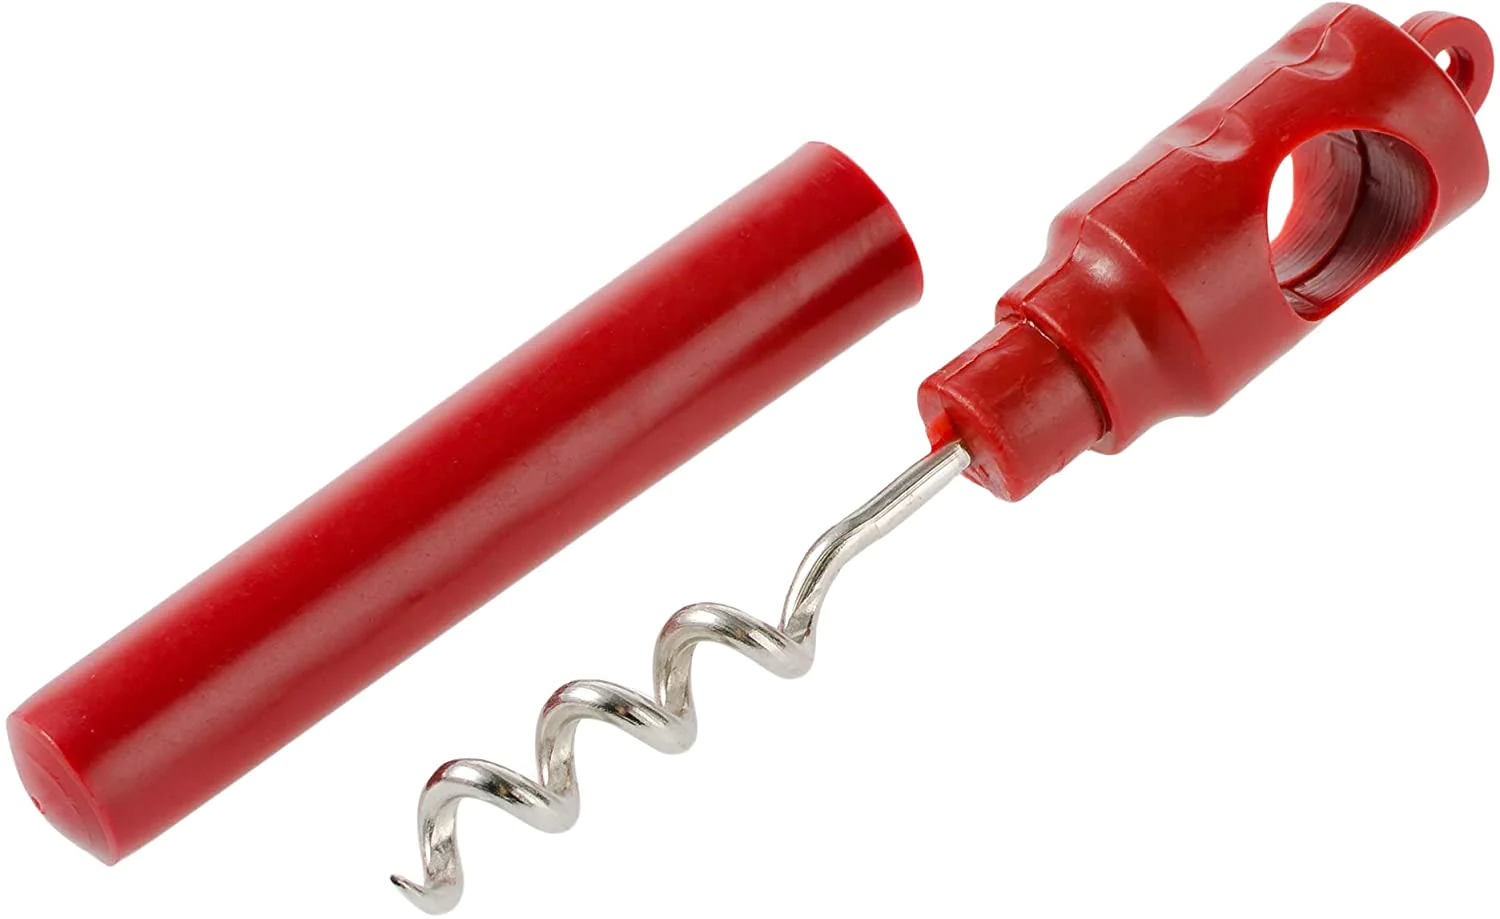 How To Open Wine With A Corkscrew Without A Lever